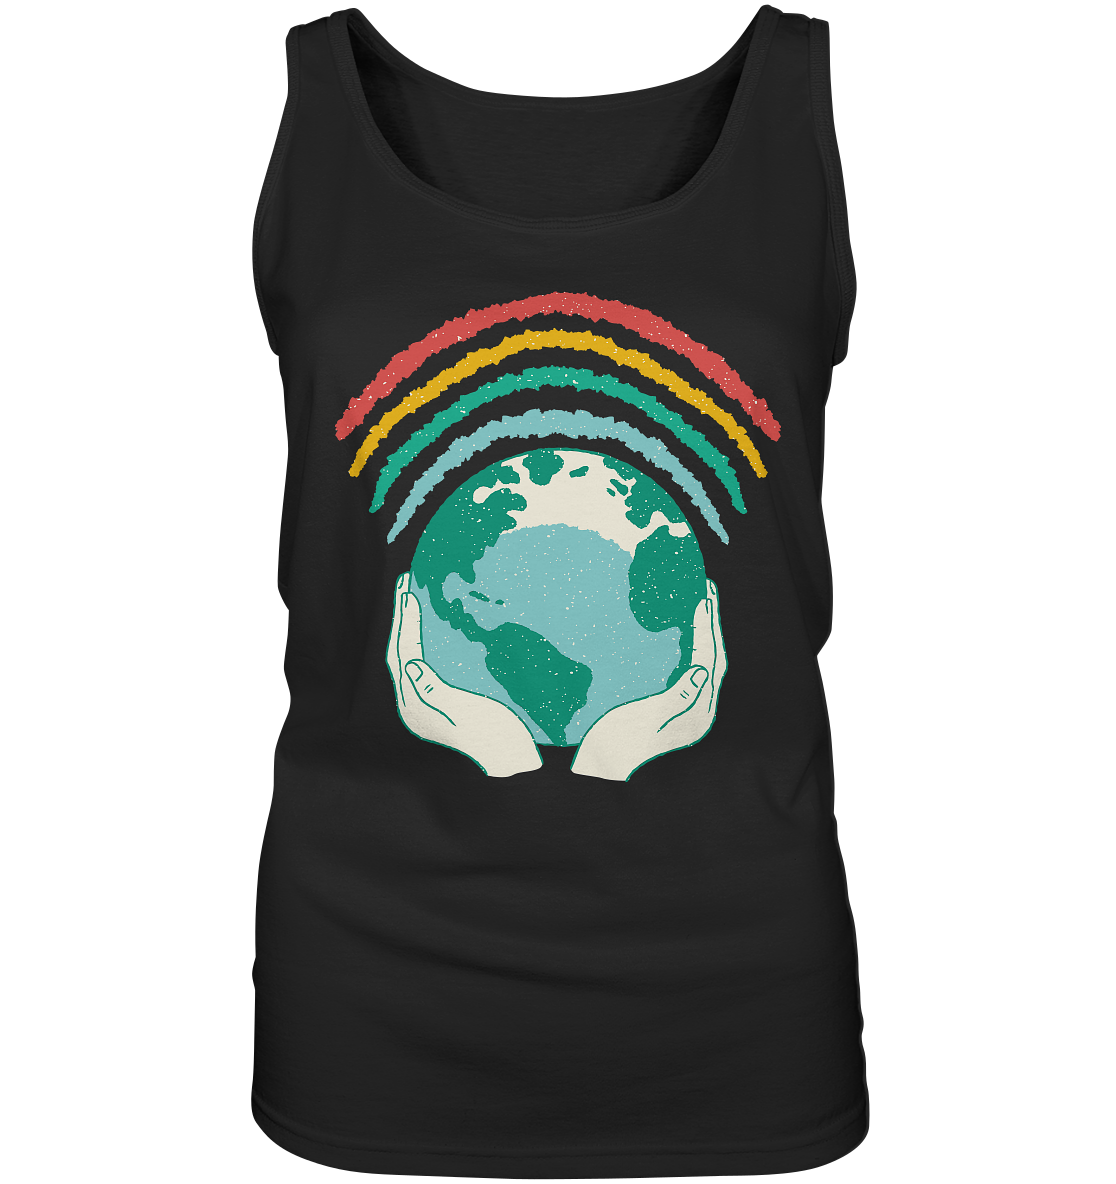 Rainbow with globe in hands - ladies tank top